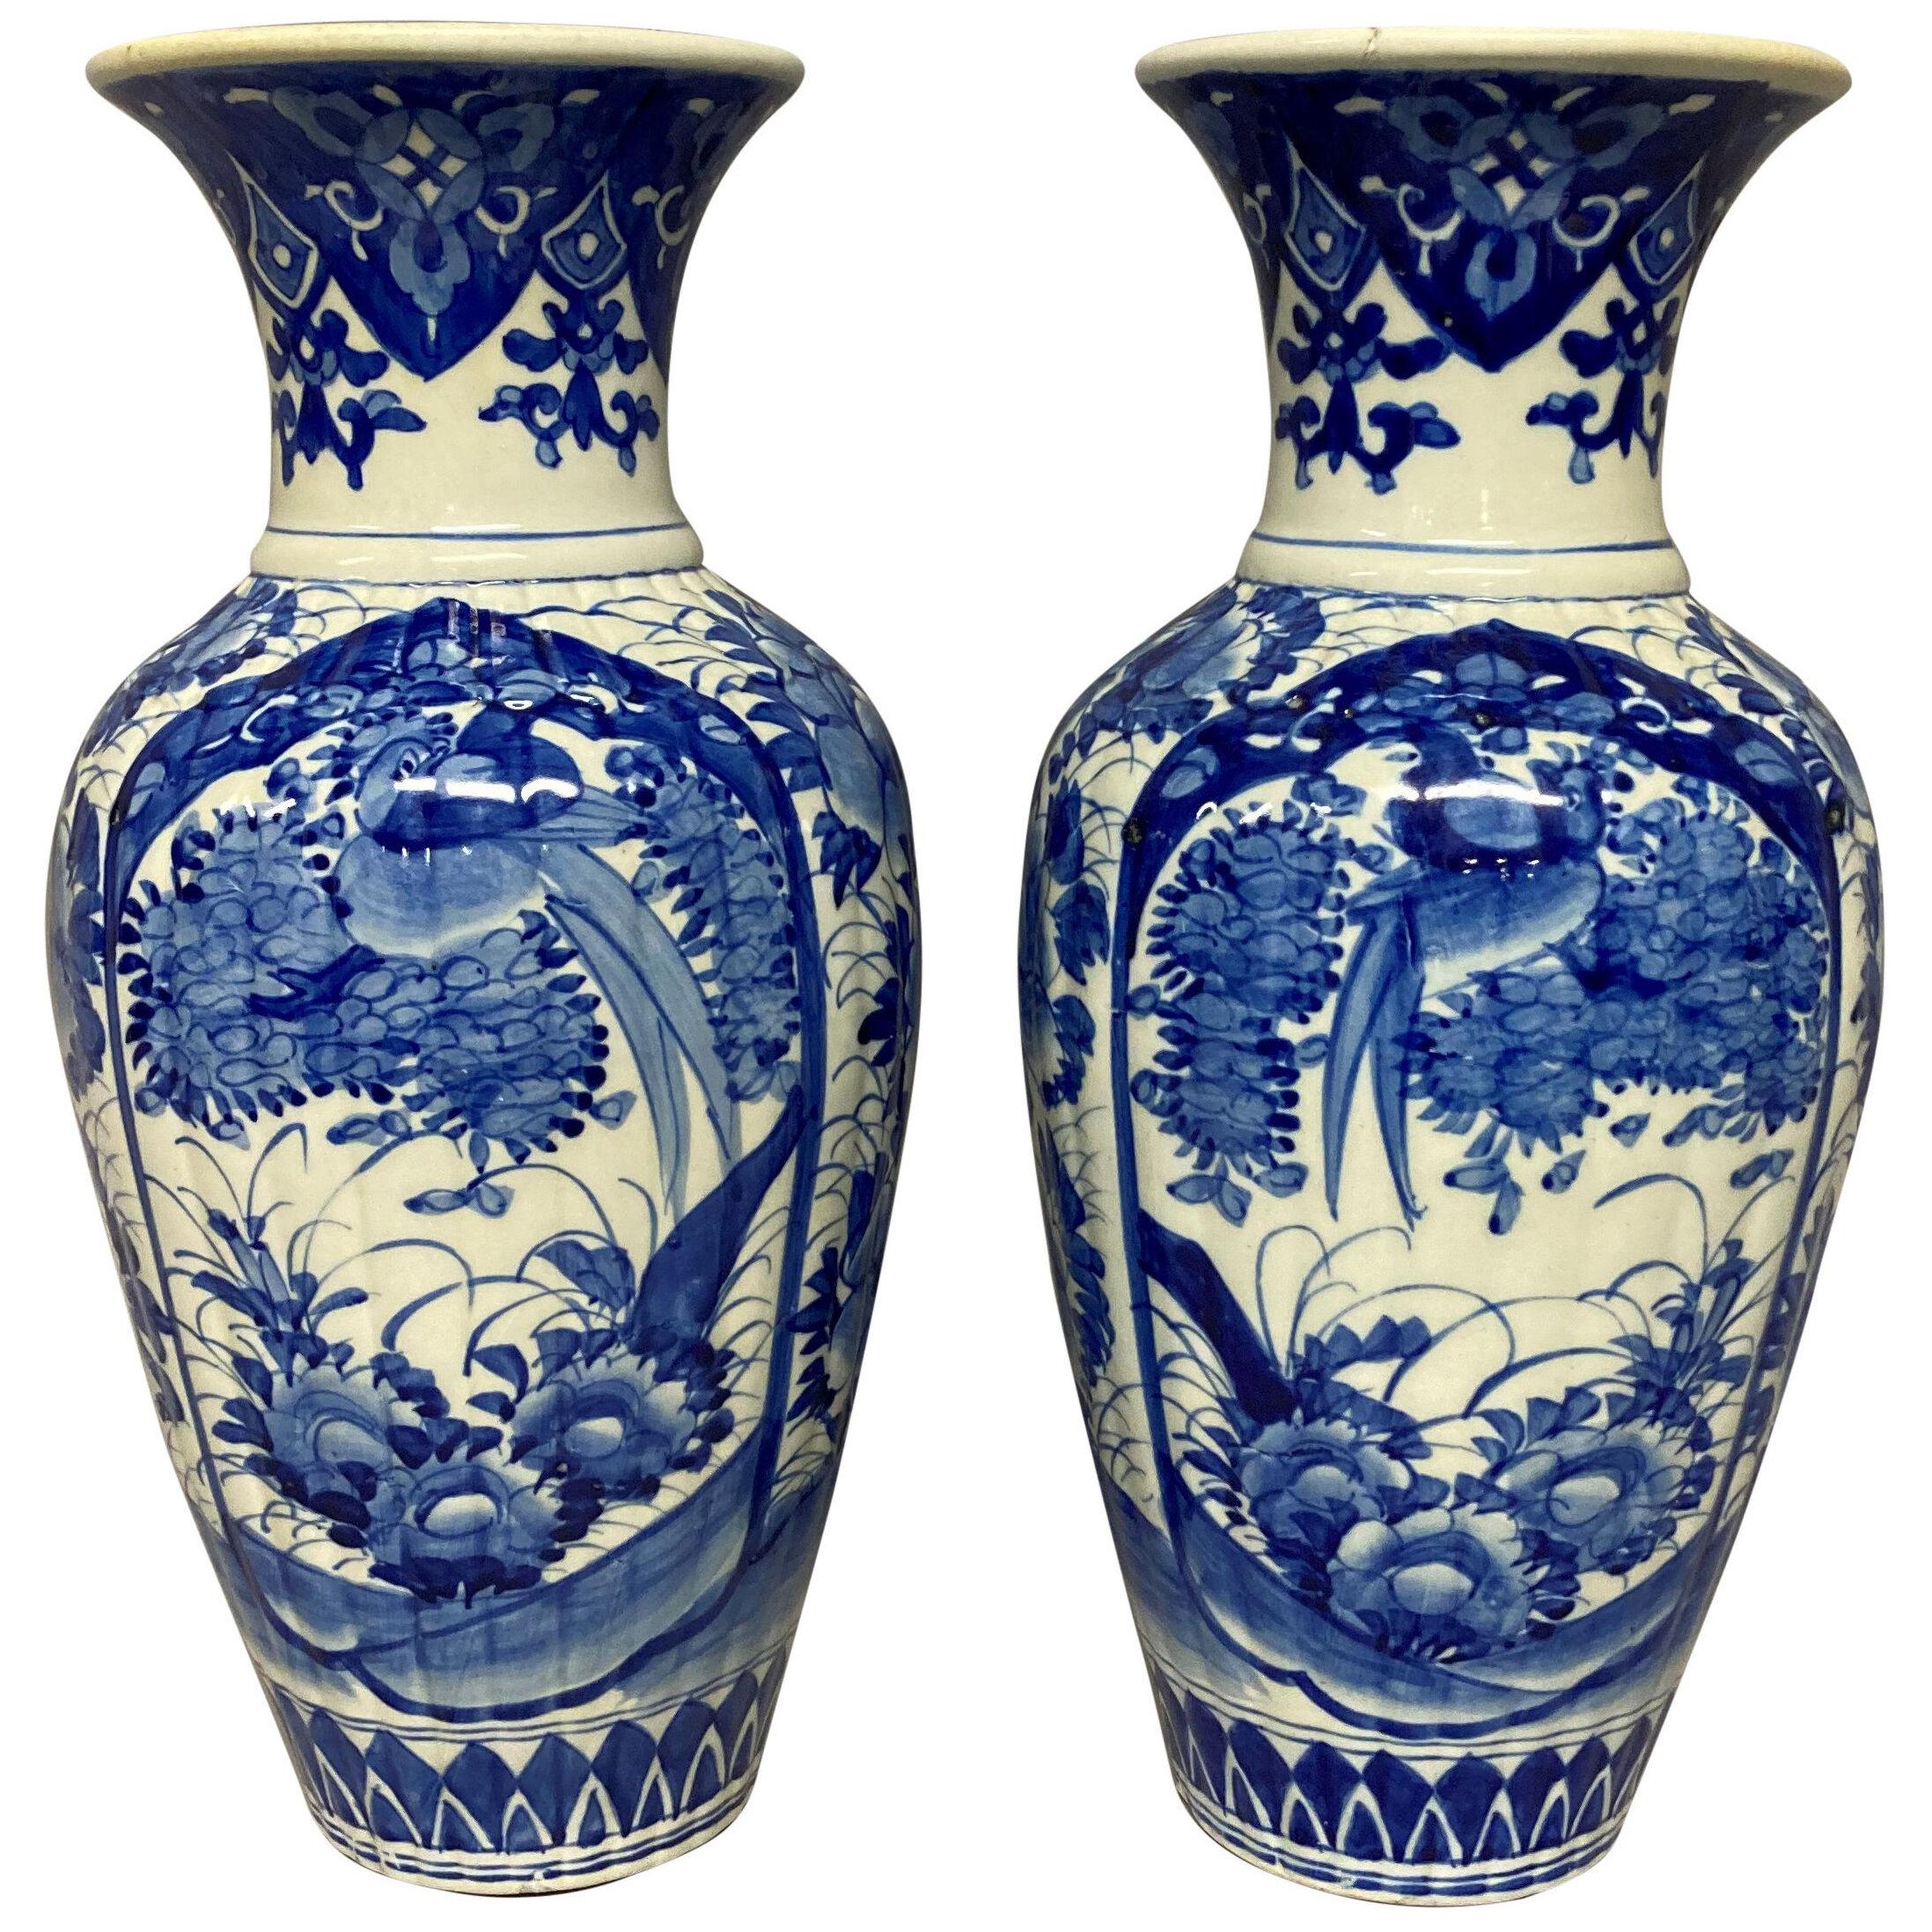 A PAIR OF CHINESE BLUE & WHITE BALUSTER VASES